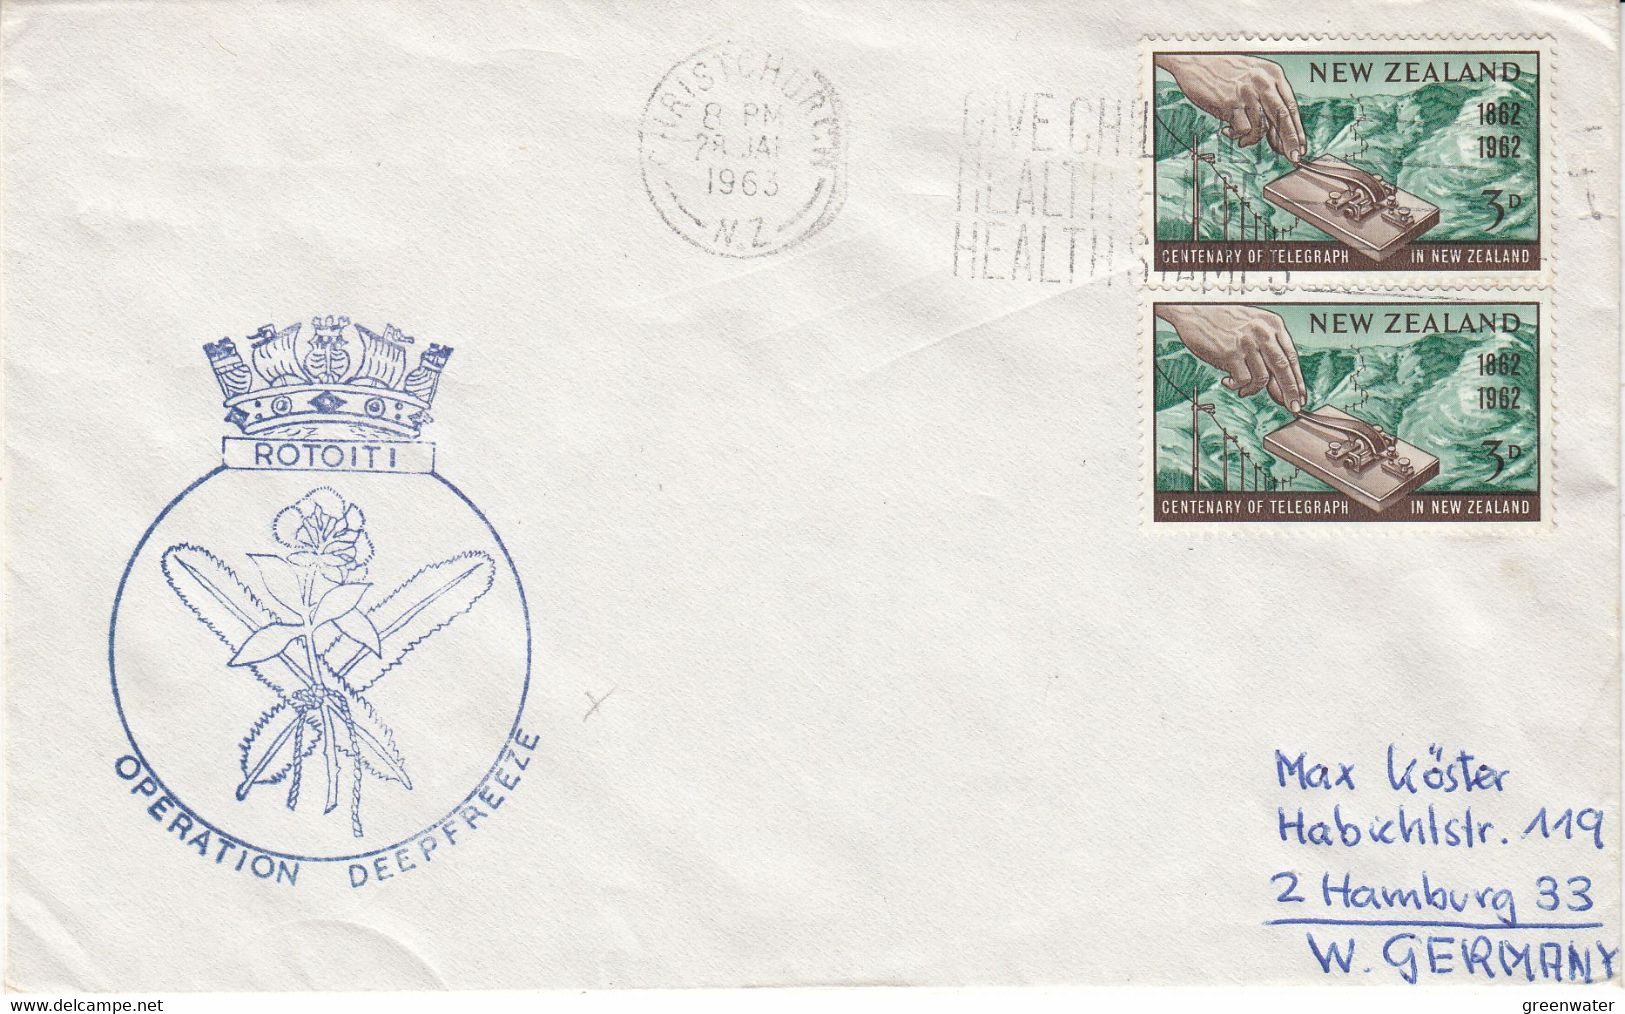 New Zealand 1963 Cover Operation Deepfree Ca Christchurch 28 JAN 1963 (52366) - Lettres & Documents